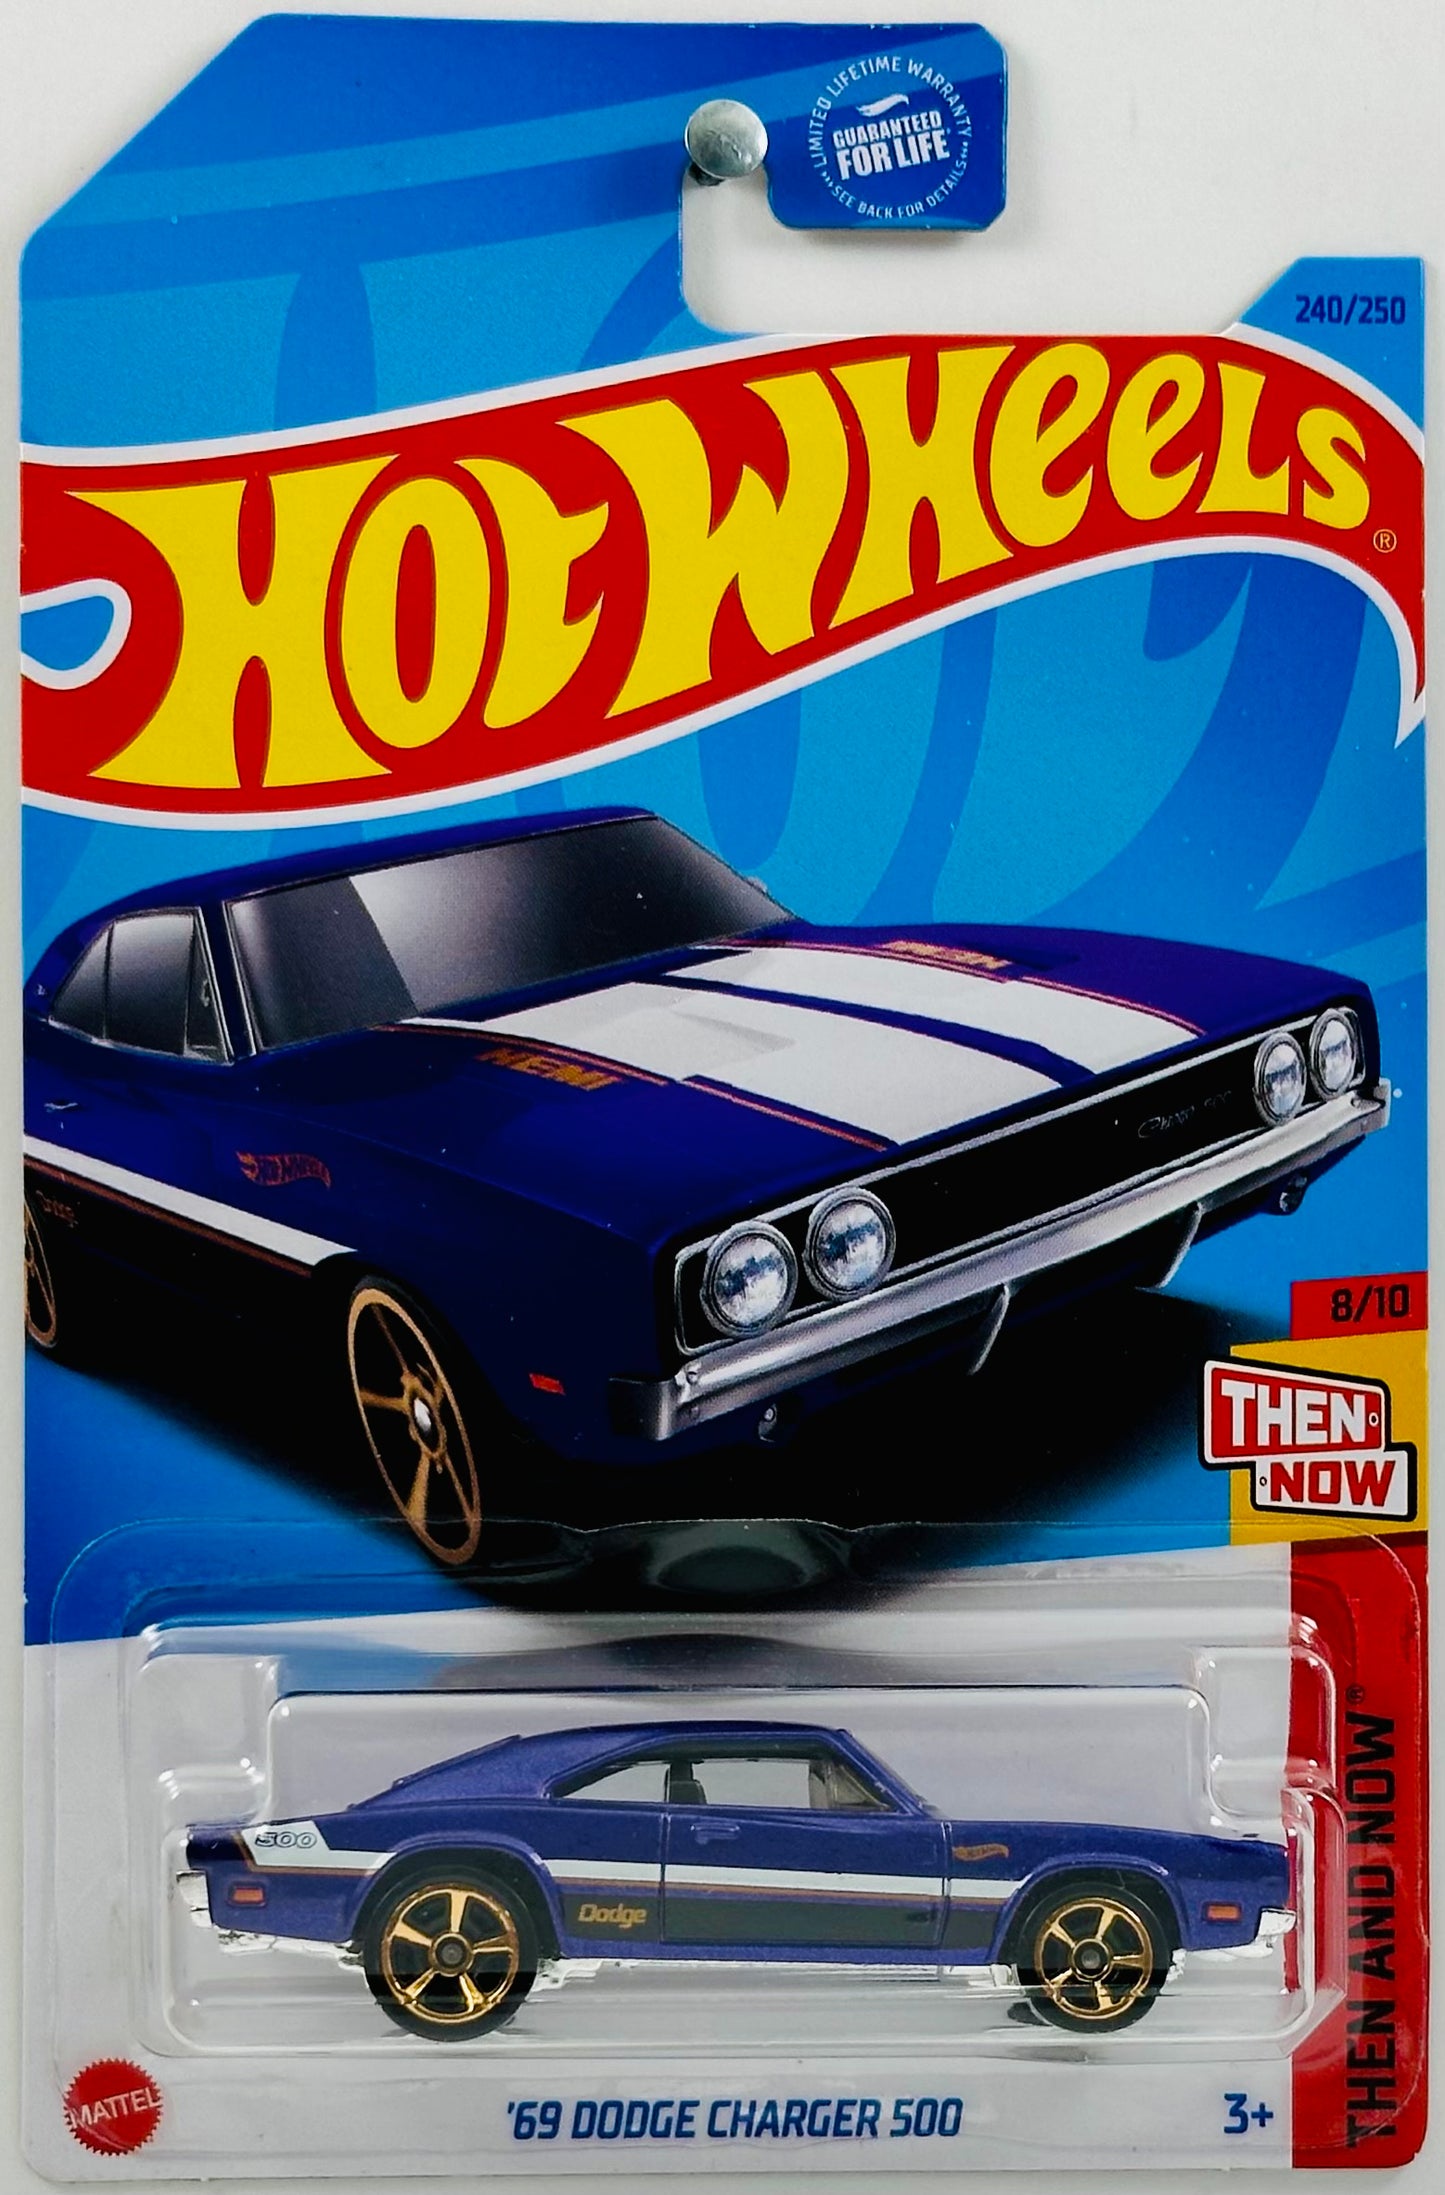 Hot Wheels 2023 - Collector # 240/250 - Then And Now 08/10 - '69 Dodge Charger 500 - Metalflake Purple - USA